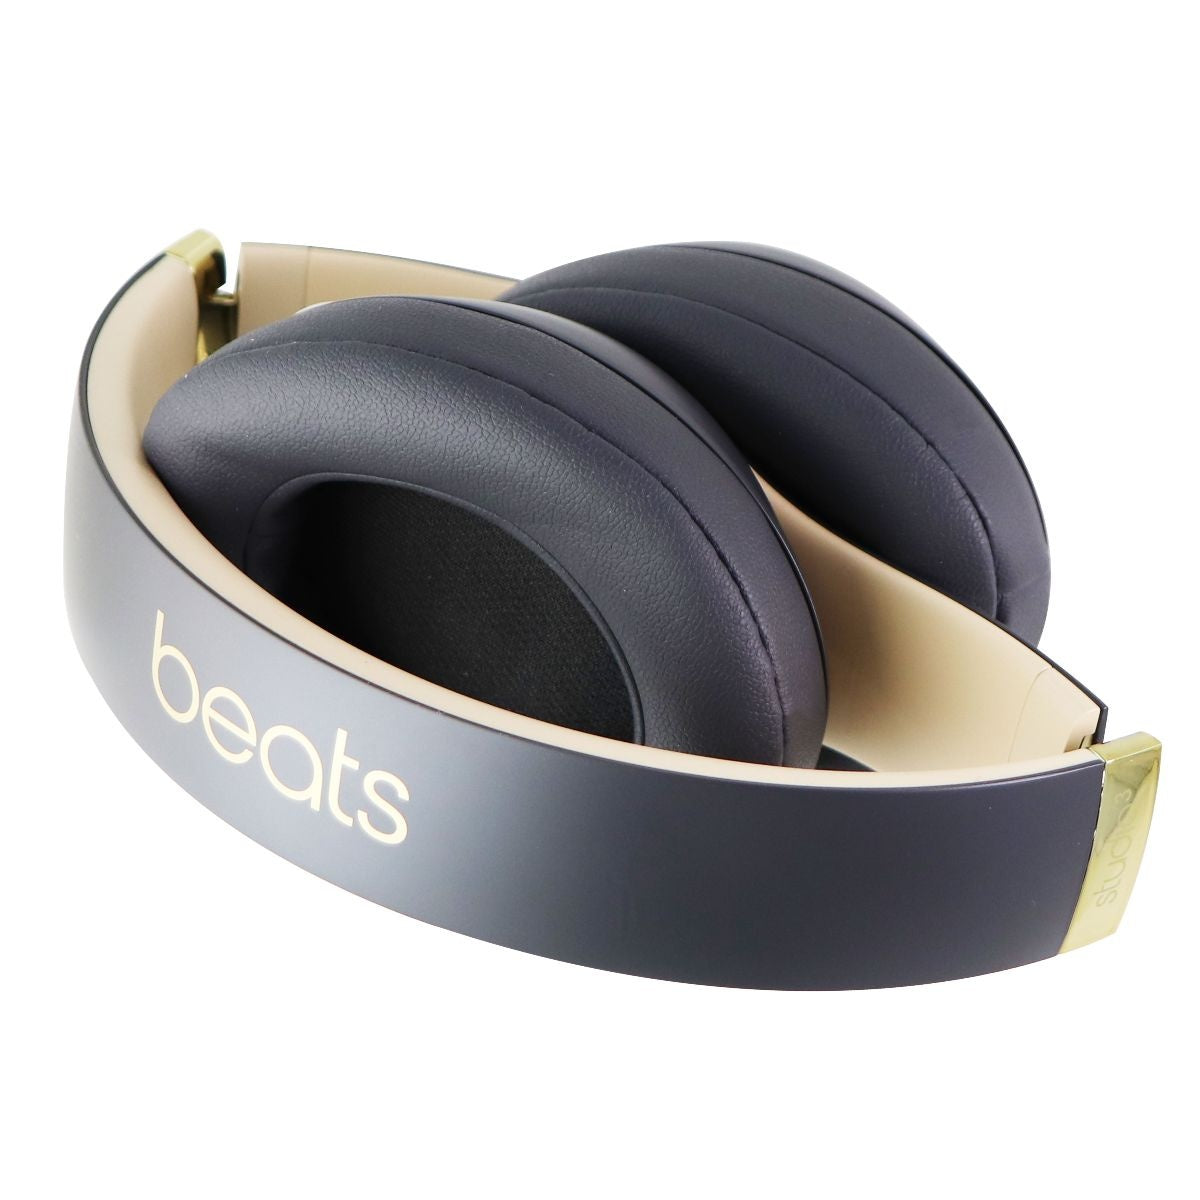 Beats Studio3 Wireless Headphones - Skyline Collection / Shadow Gray (MXJ92LL/A) Portable Audio - Headphones Beats by Dr. Dre    - Simple Cell Bulk Wholesale Pricing - USA Seller